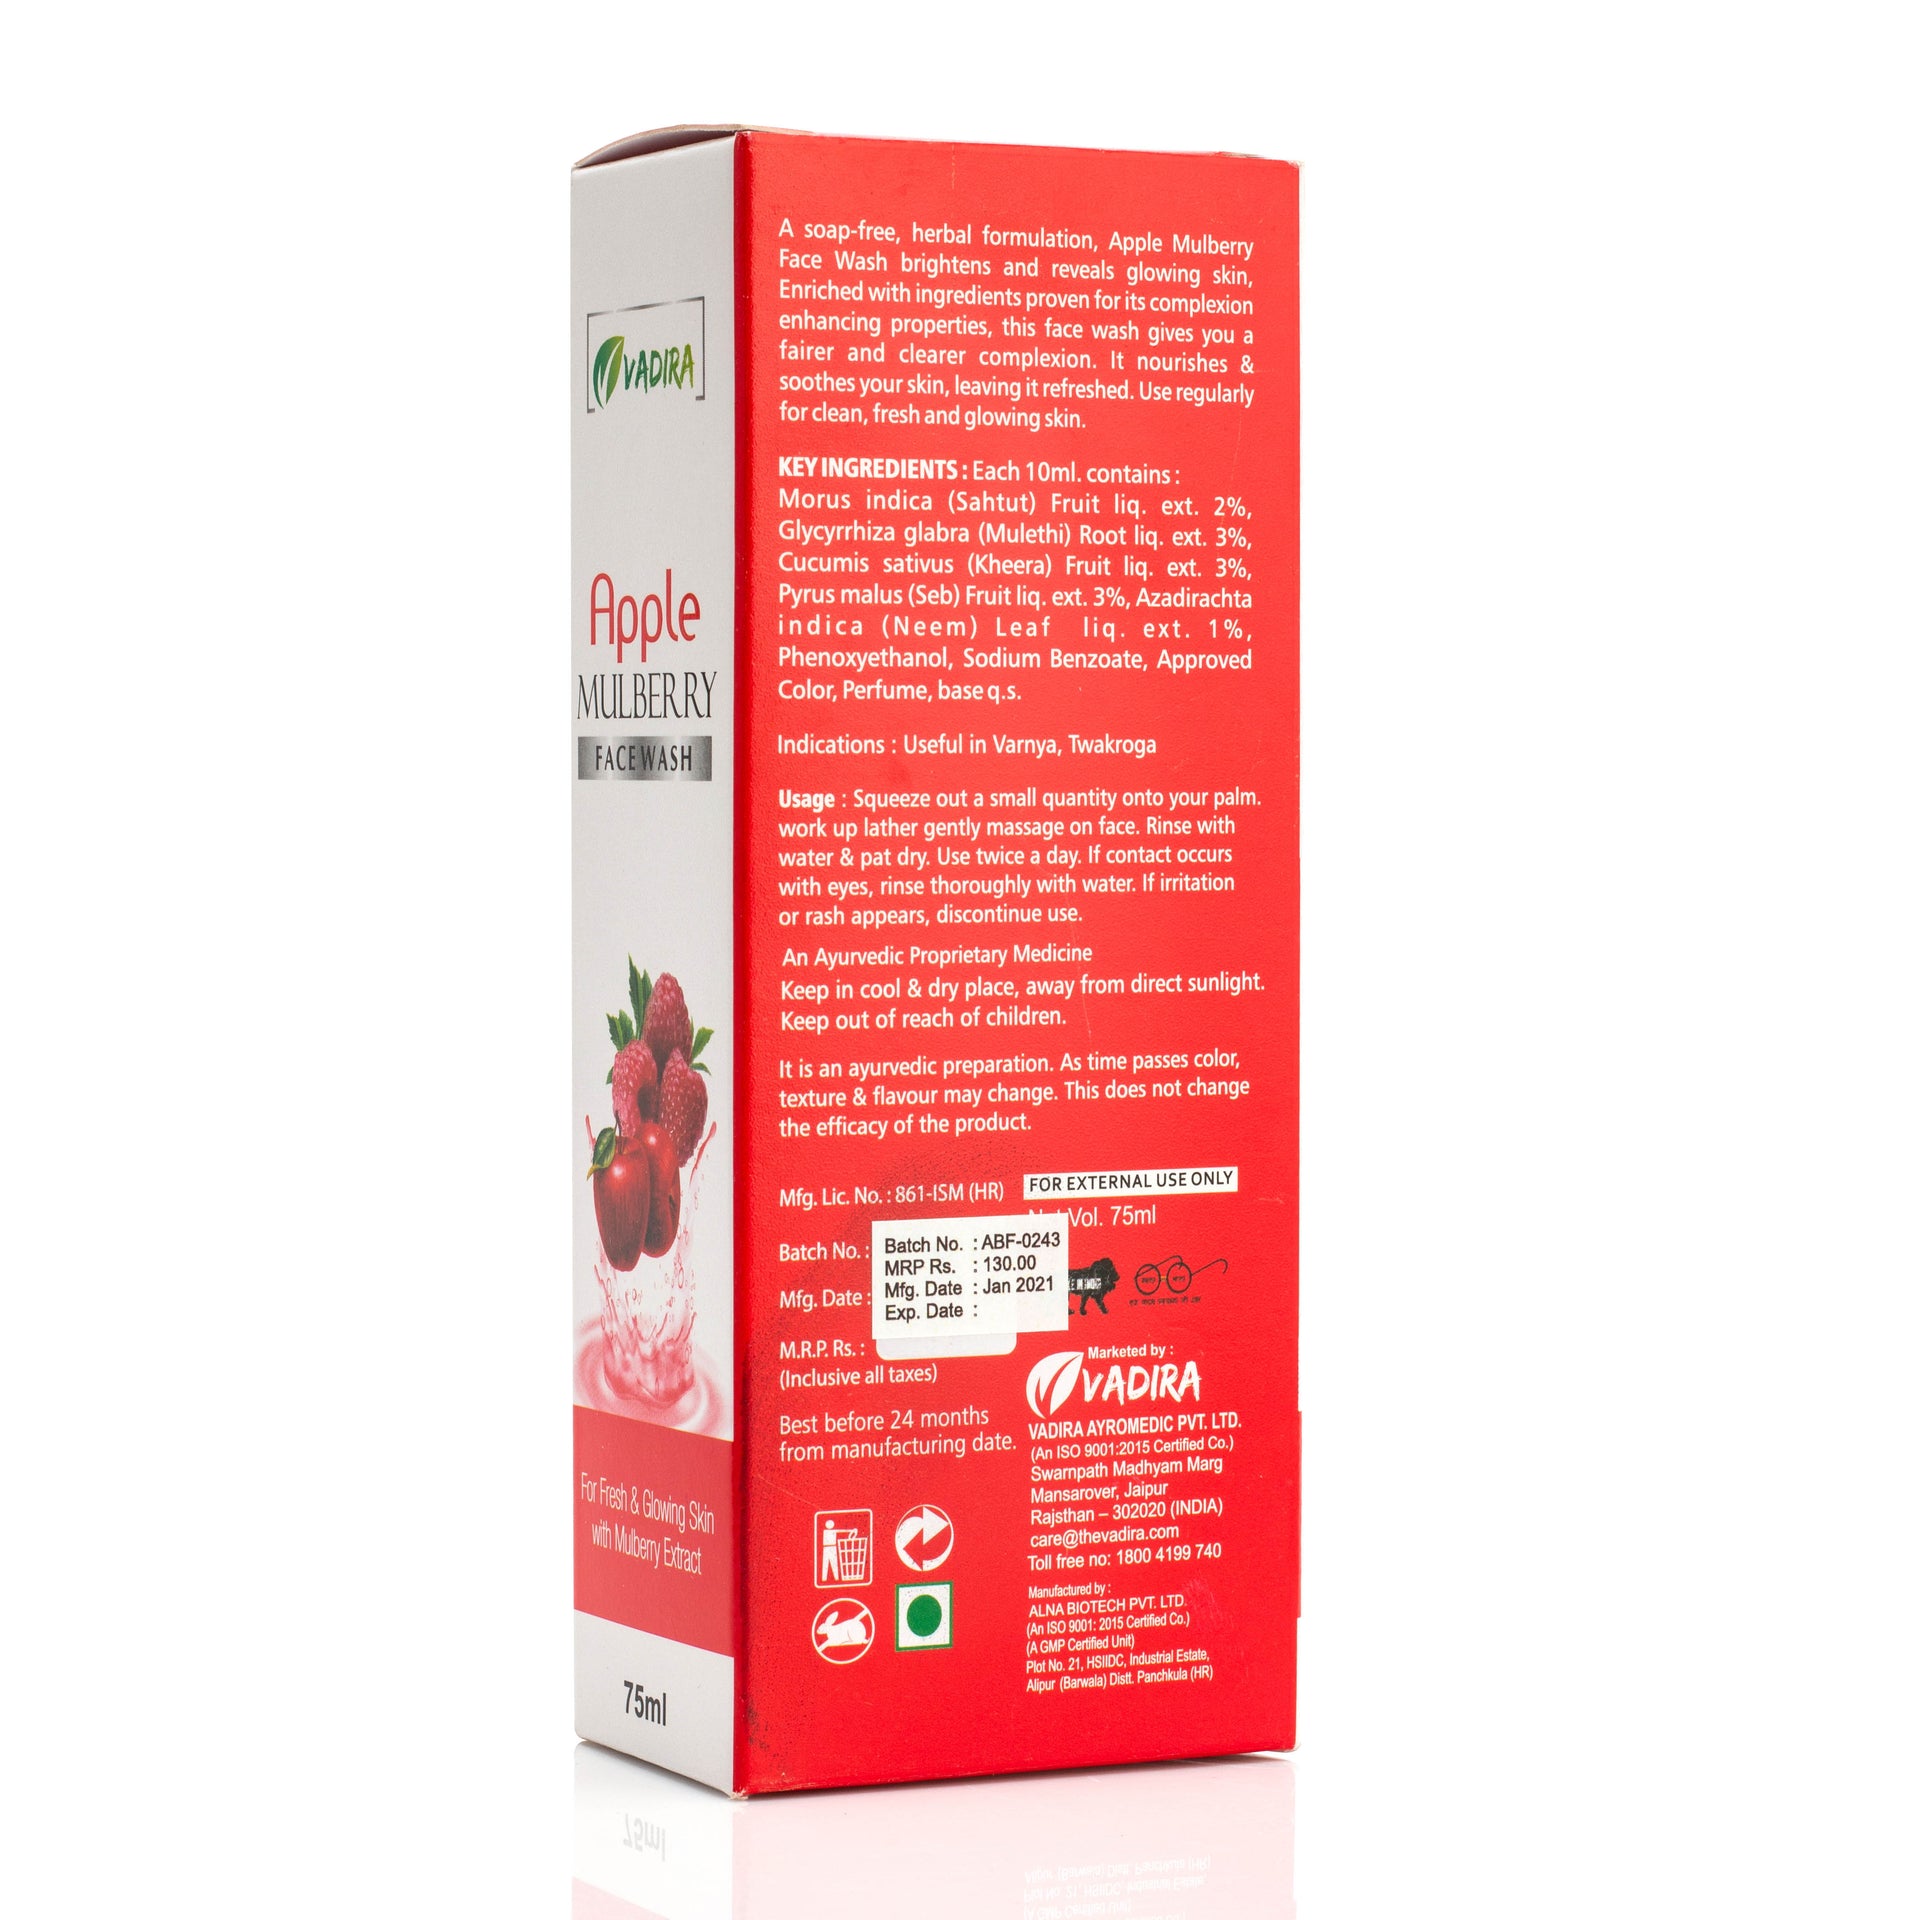 Vadira Apple Mulberry Face wash